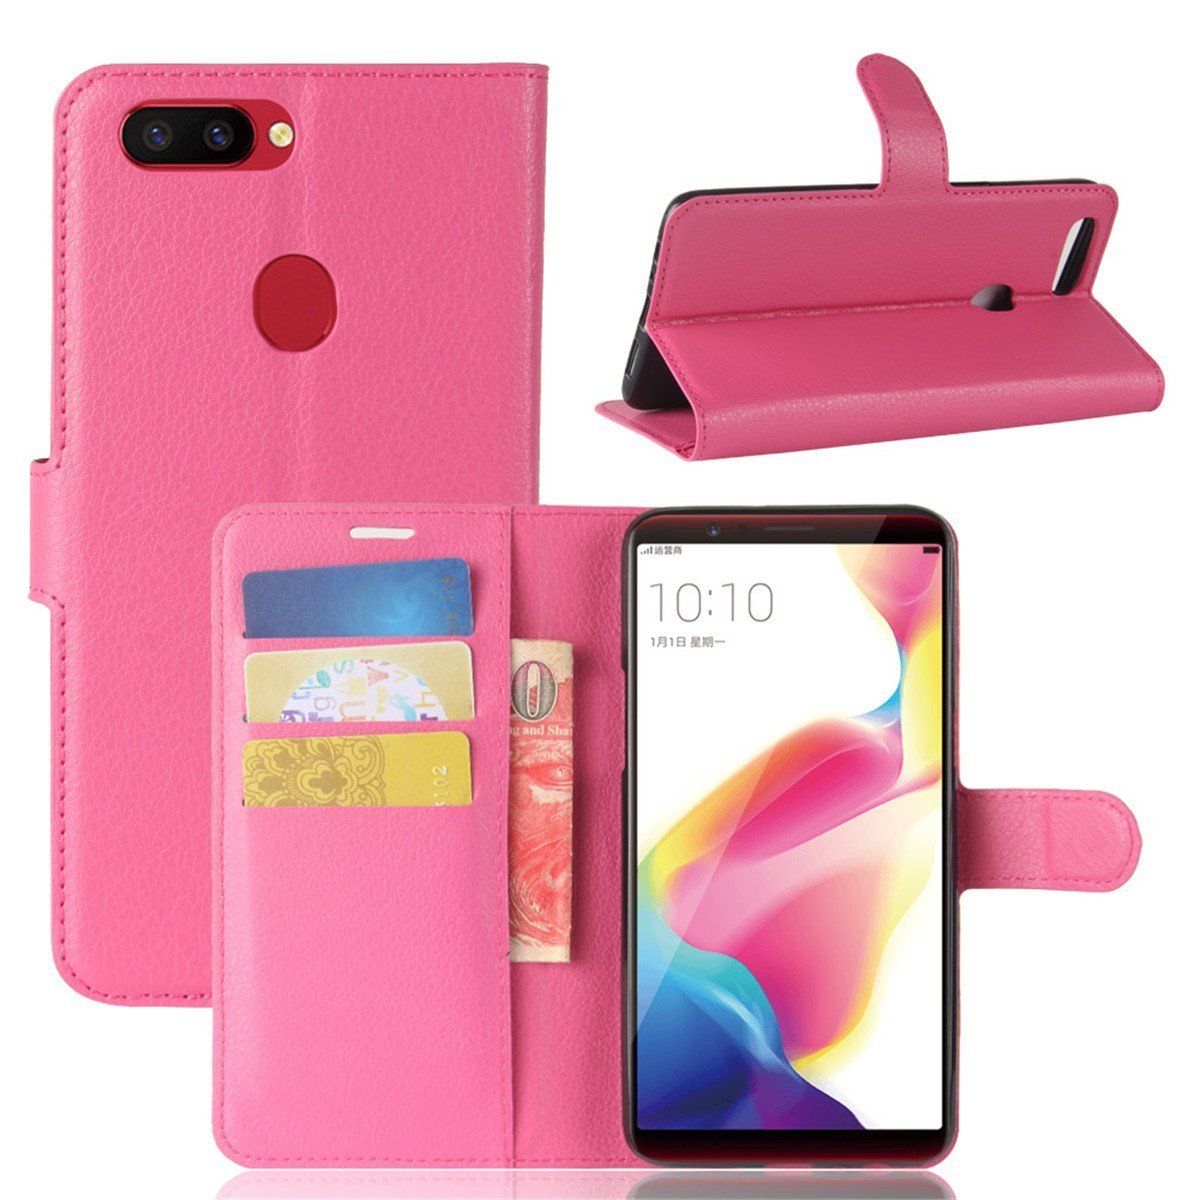 R15 Pro Premium Leather Wallet Case Cover For Oppo Case-Hot Pink